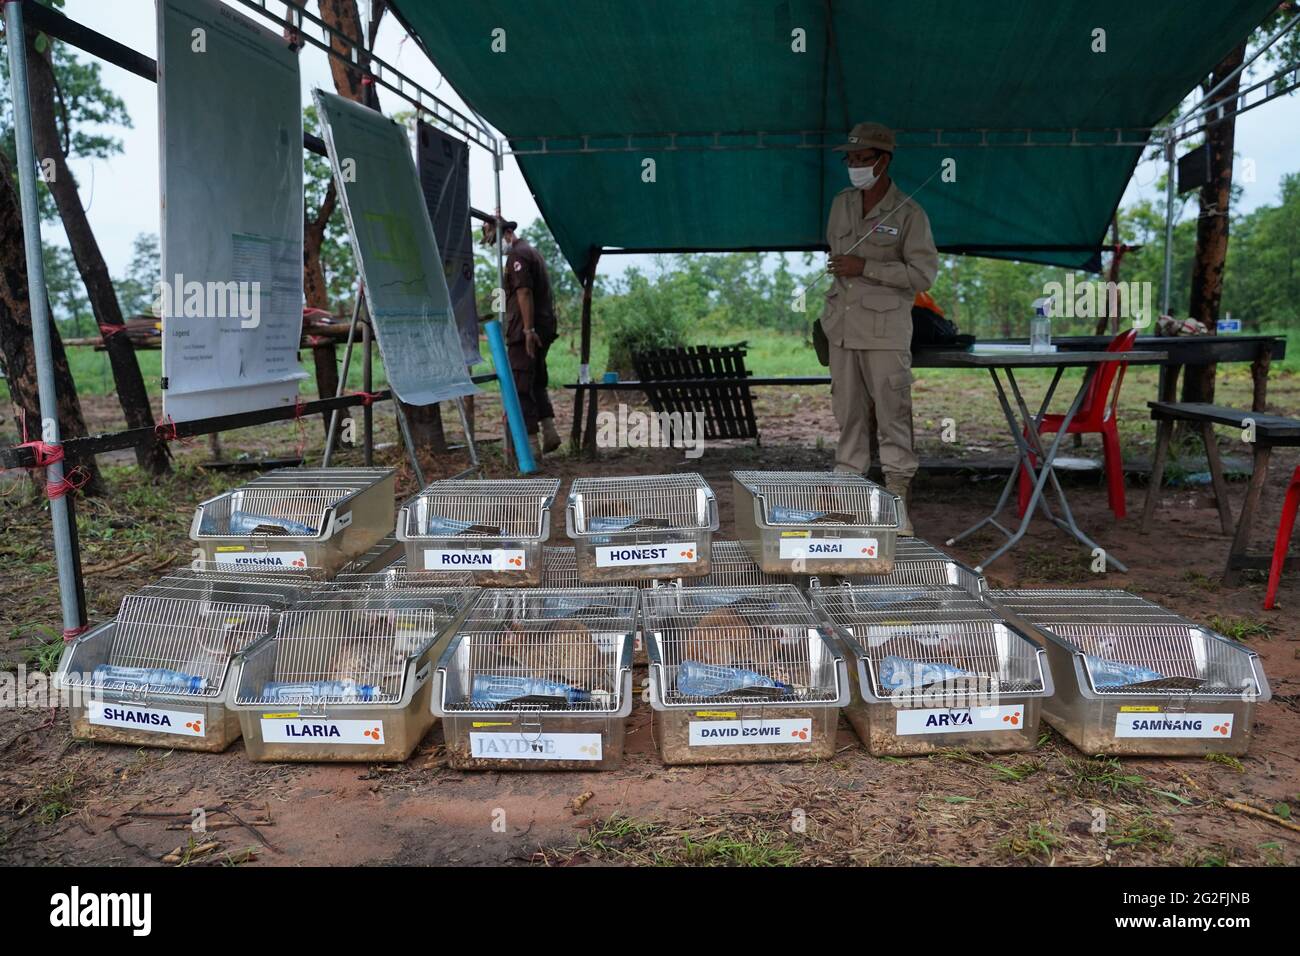 Mine detection rats are seen  in their transport cages before working in an area being demined in Preah Vihear province, Cambodia, June 11, 2021. Picture taken June 11, 2021. REUTERS/Cindy Liu Stock Photo